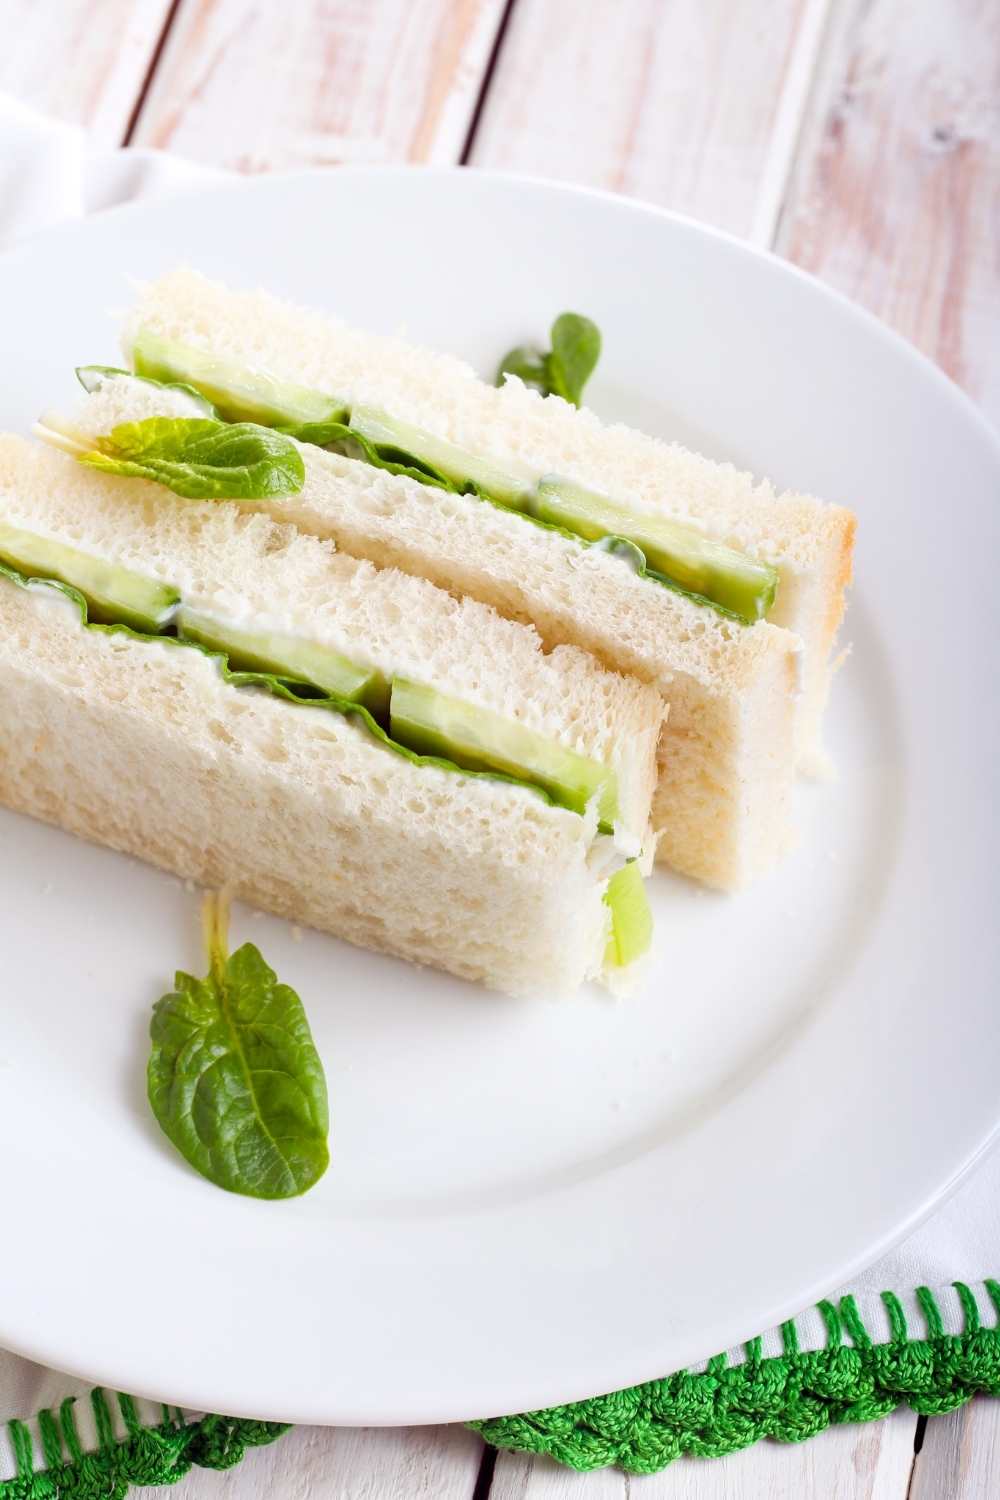 Pioneer Woman's Cucumber Sandwiches